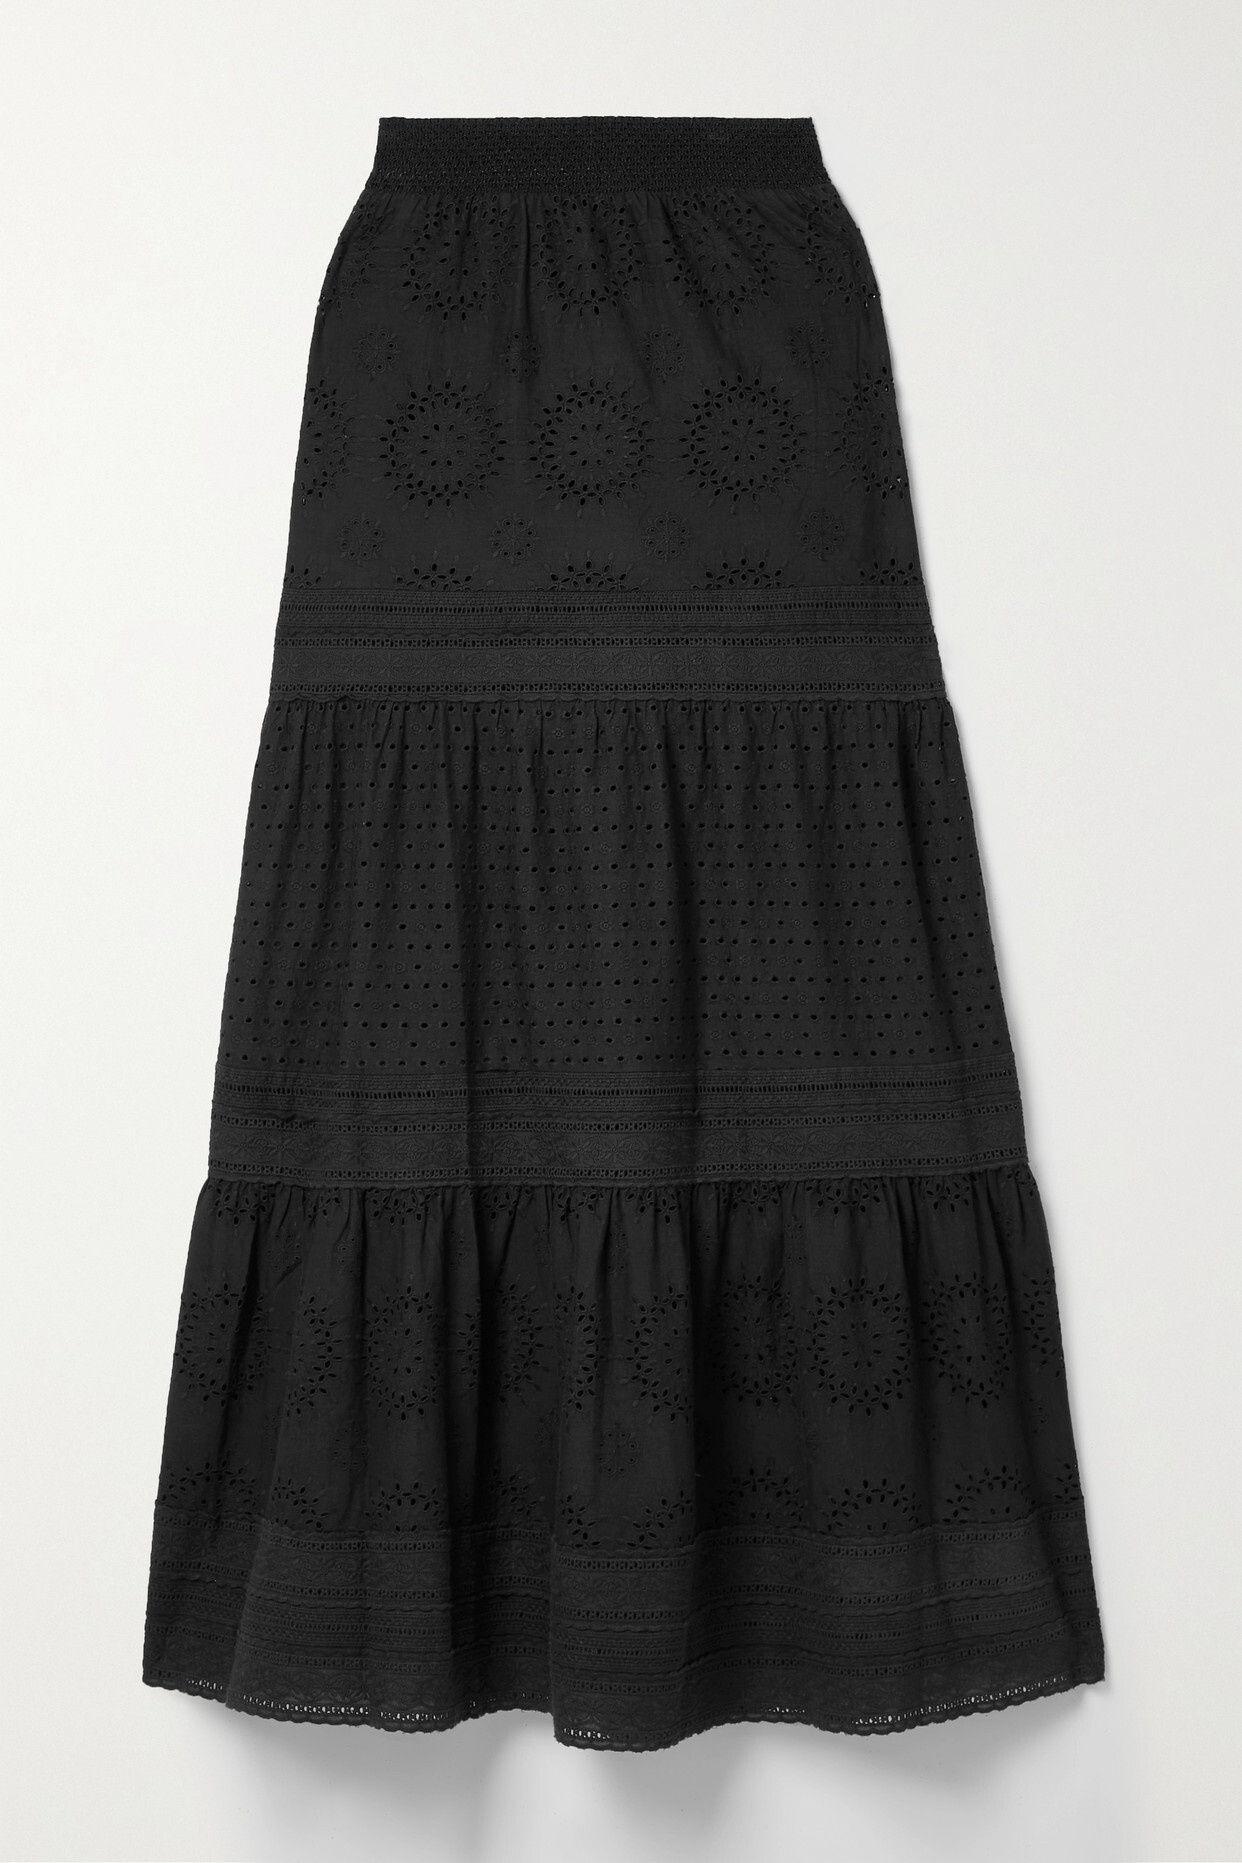 Alice + Olivia Alice + Olivia - Reise Tiered Broderie Anglaise Cotton And Linen-blend Maxi Skirt - Black